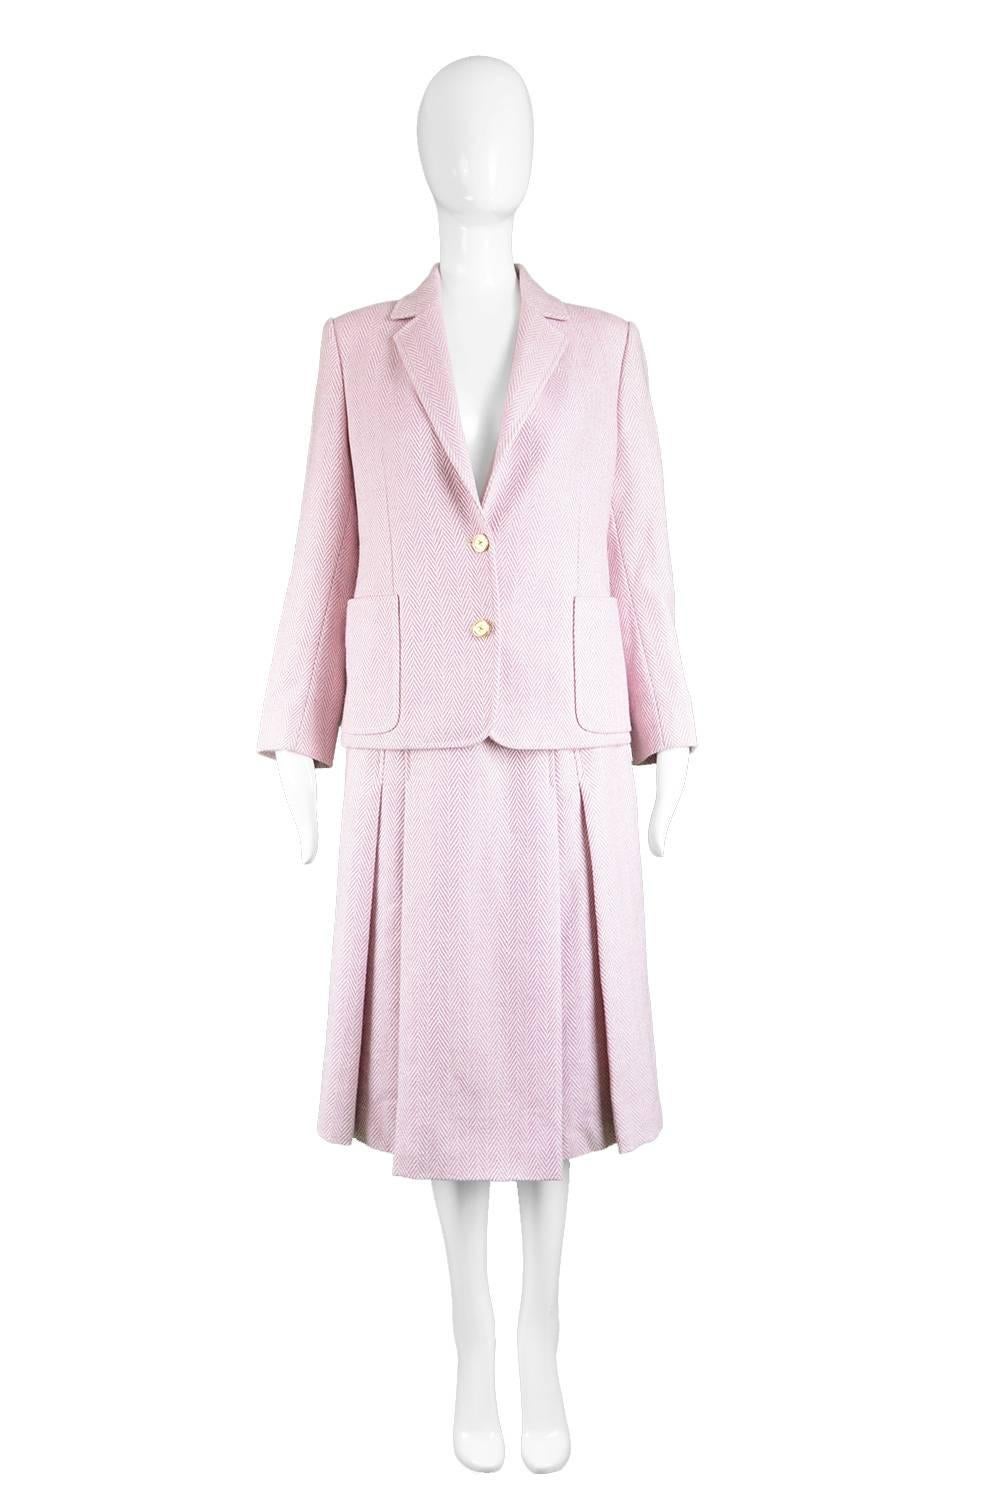 Celine Vintage 1980s Pink Silk & Wool Herringbone Tweed Pleated Mid Length Skirt Suit

Estimated Size: UK 8-10/ US 4-6/ EU 36-38. Please check measurements.  
Jacket
Bust - 38” / 96cm (meant to have a slightly boxy, oversized fit)
Waist - 36” /